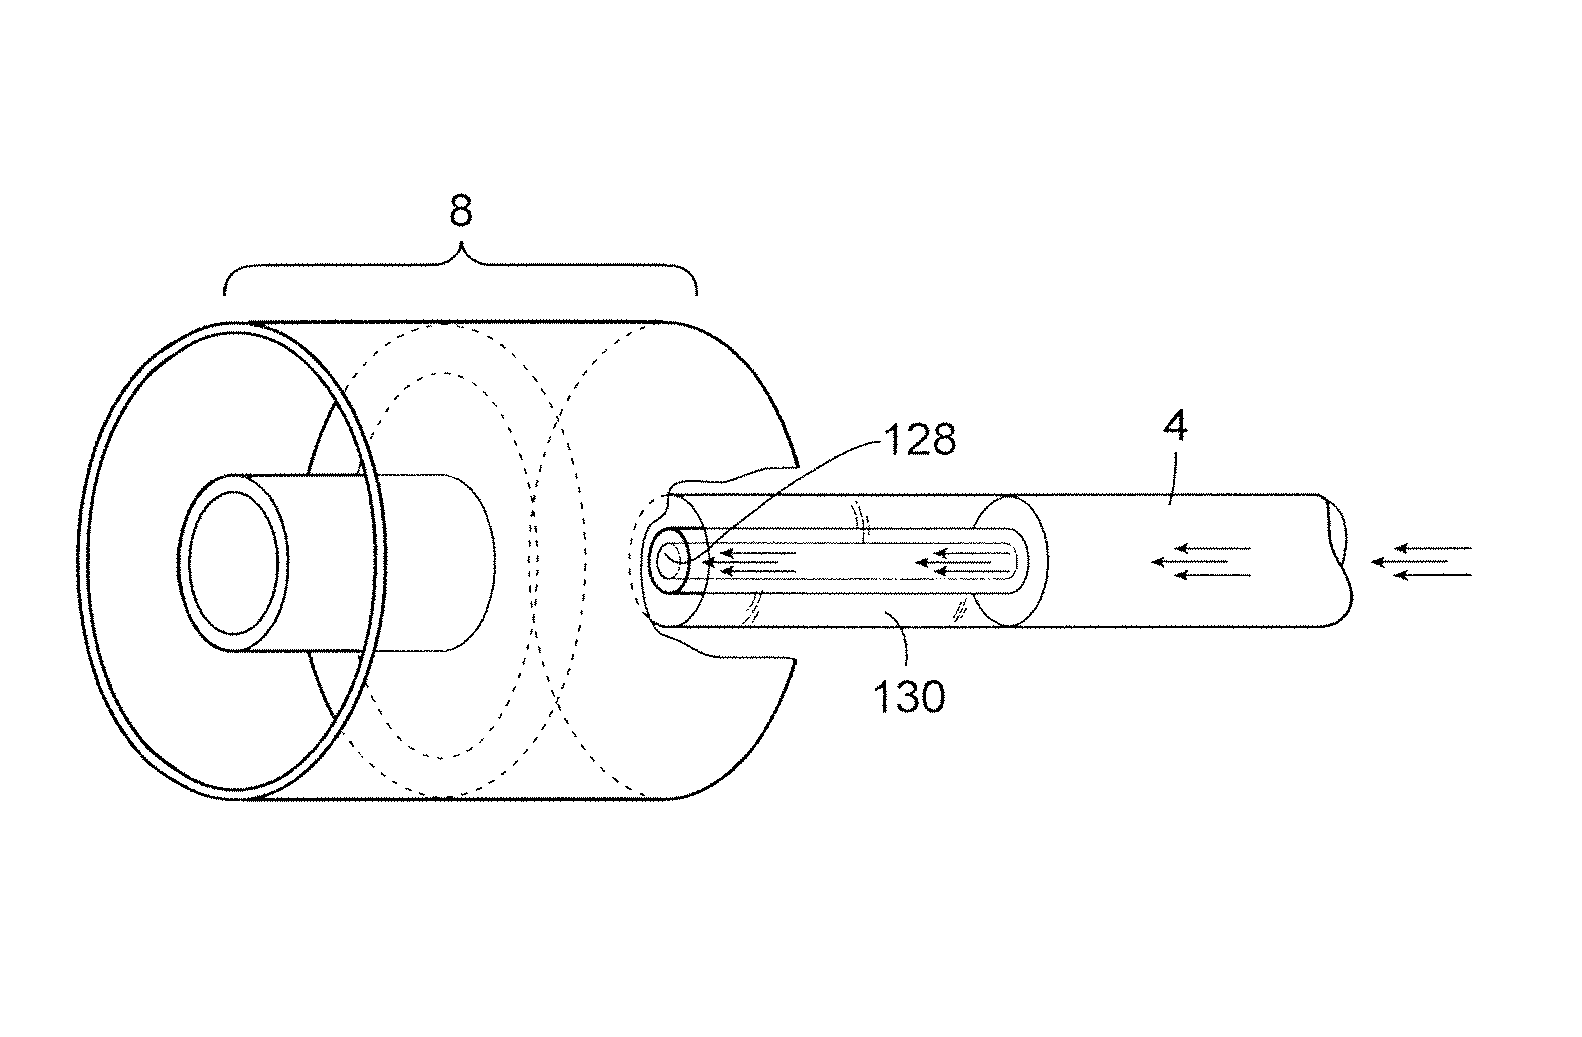 Device to indicate priming of an infusion line